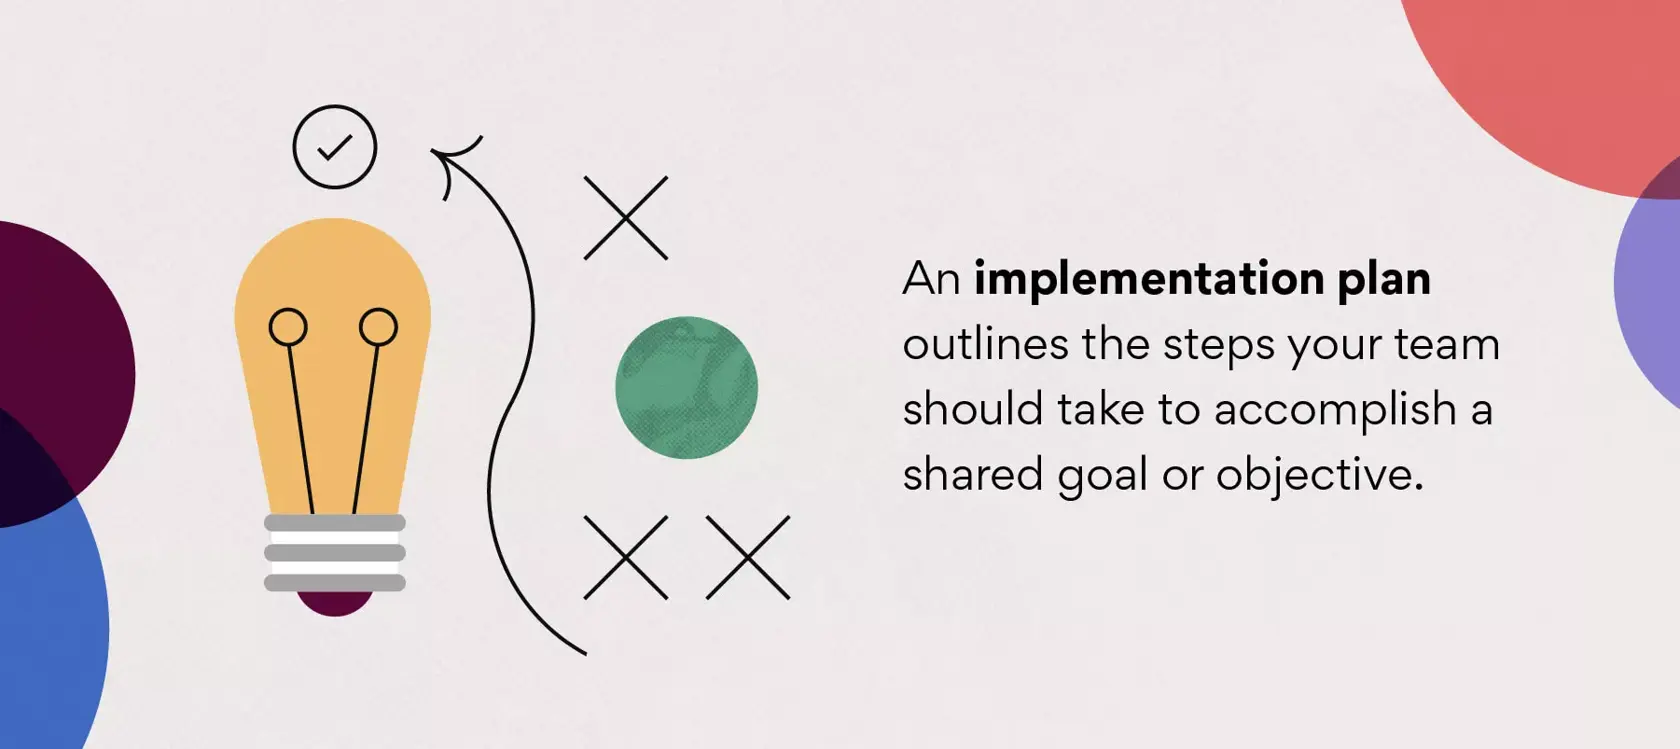 What is an implementation plan?